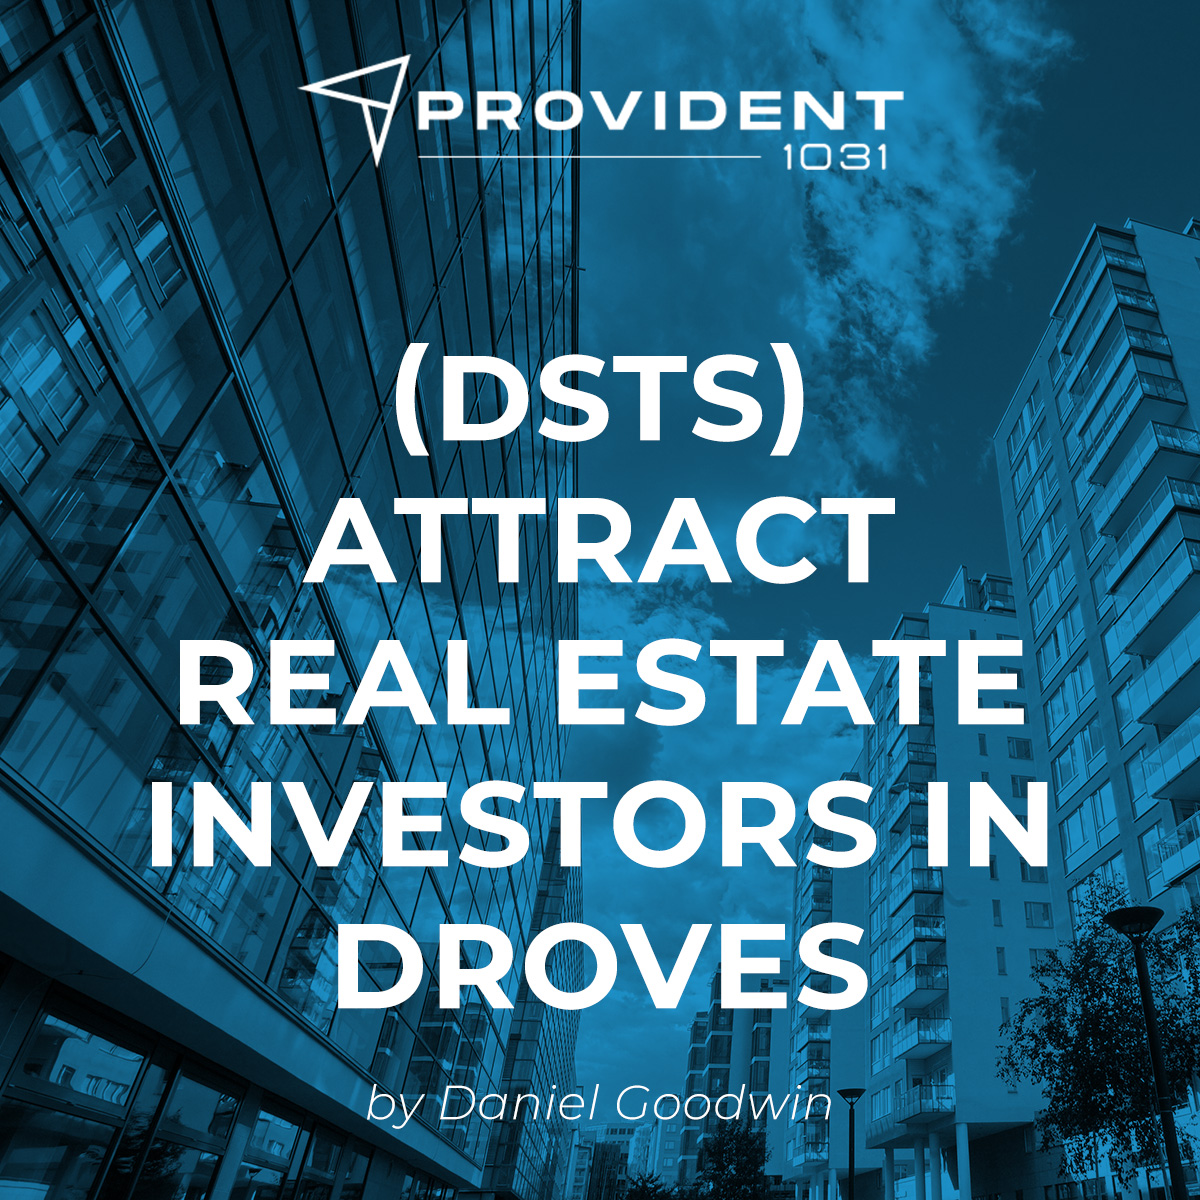 DSTs Attract Real Estate Investors in Droves - by Daniel Goodwin